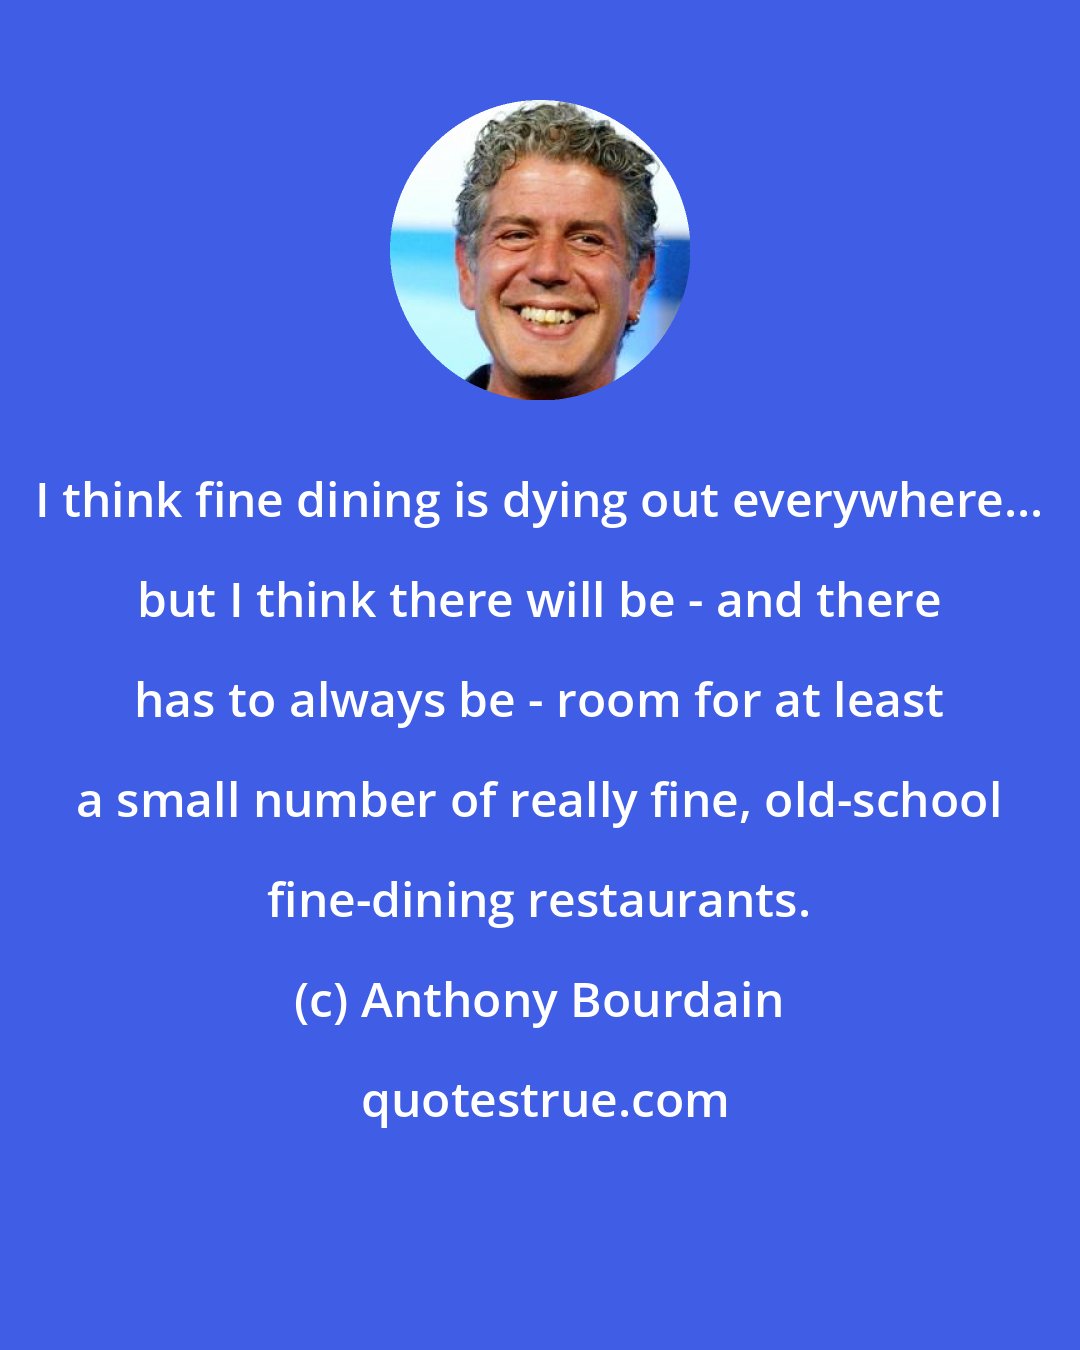 Anthony Bourdain: I think fine dining is dying out everywhere... but I think there will be - and there has to always be - room for at least a small number of really fine, old-school fine-dining restaurants.